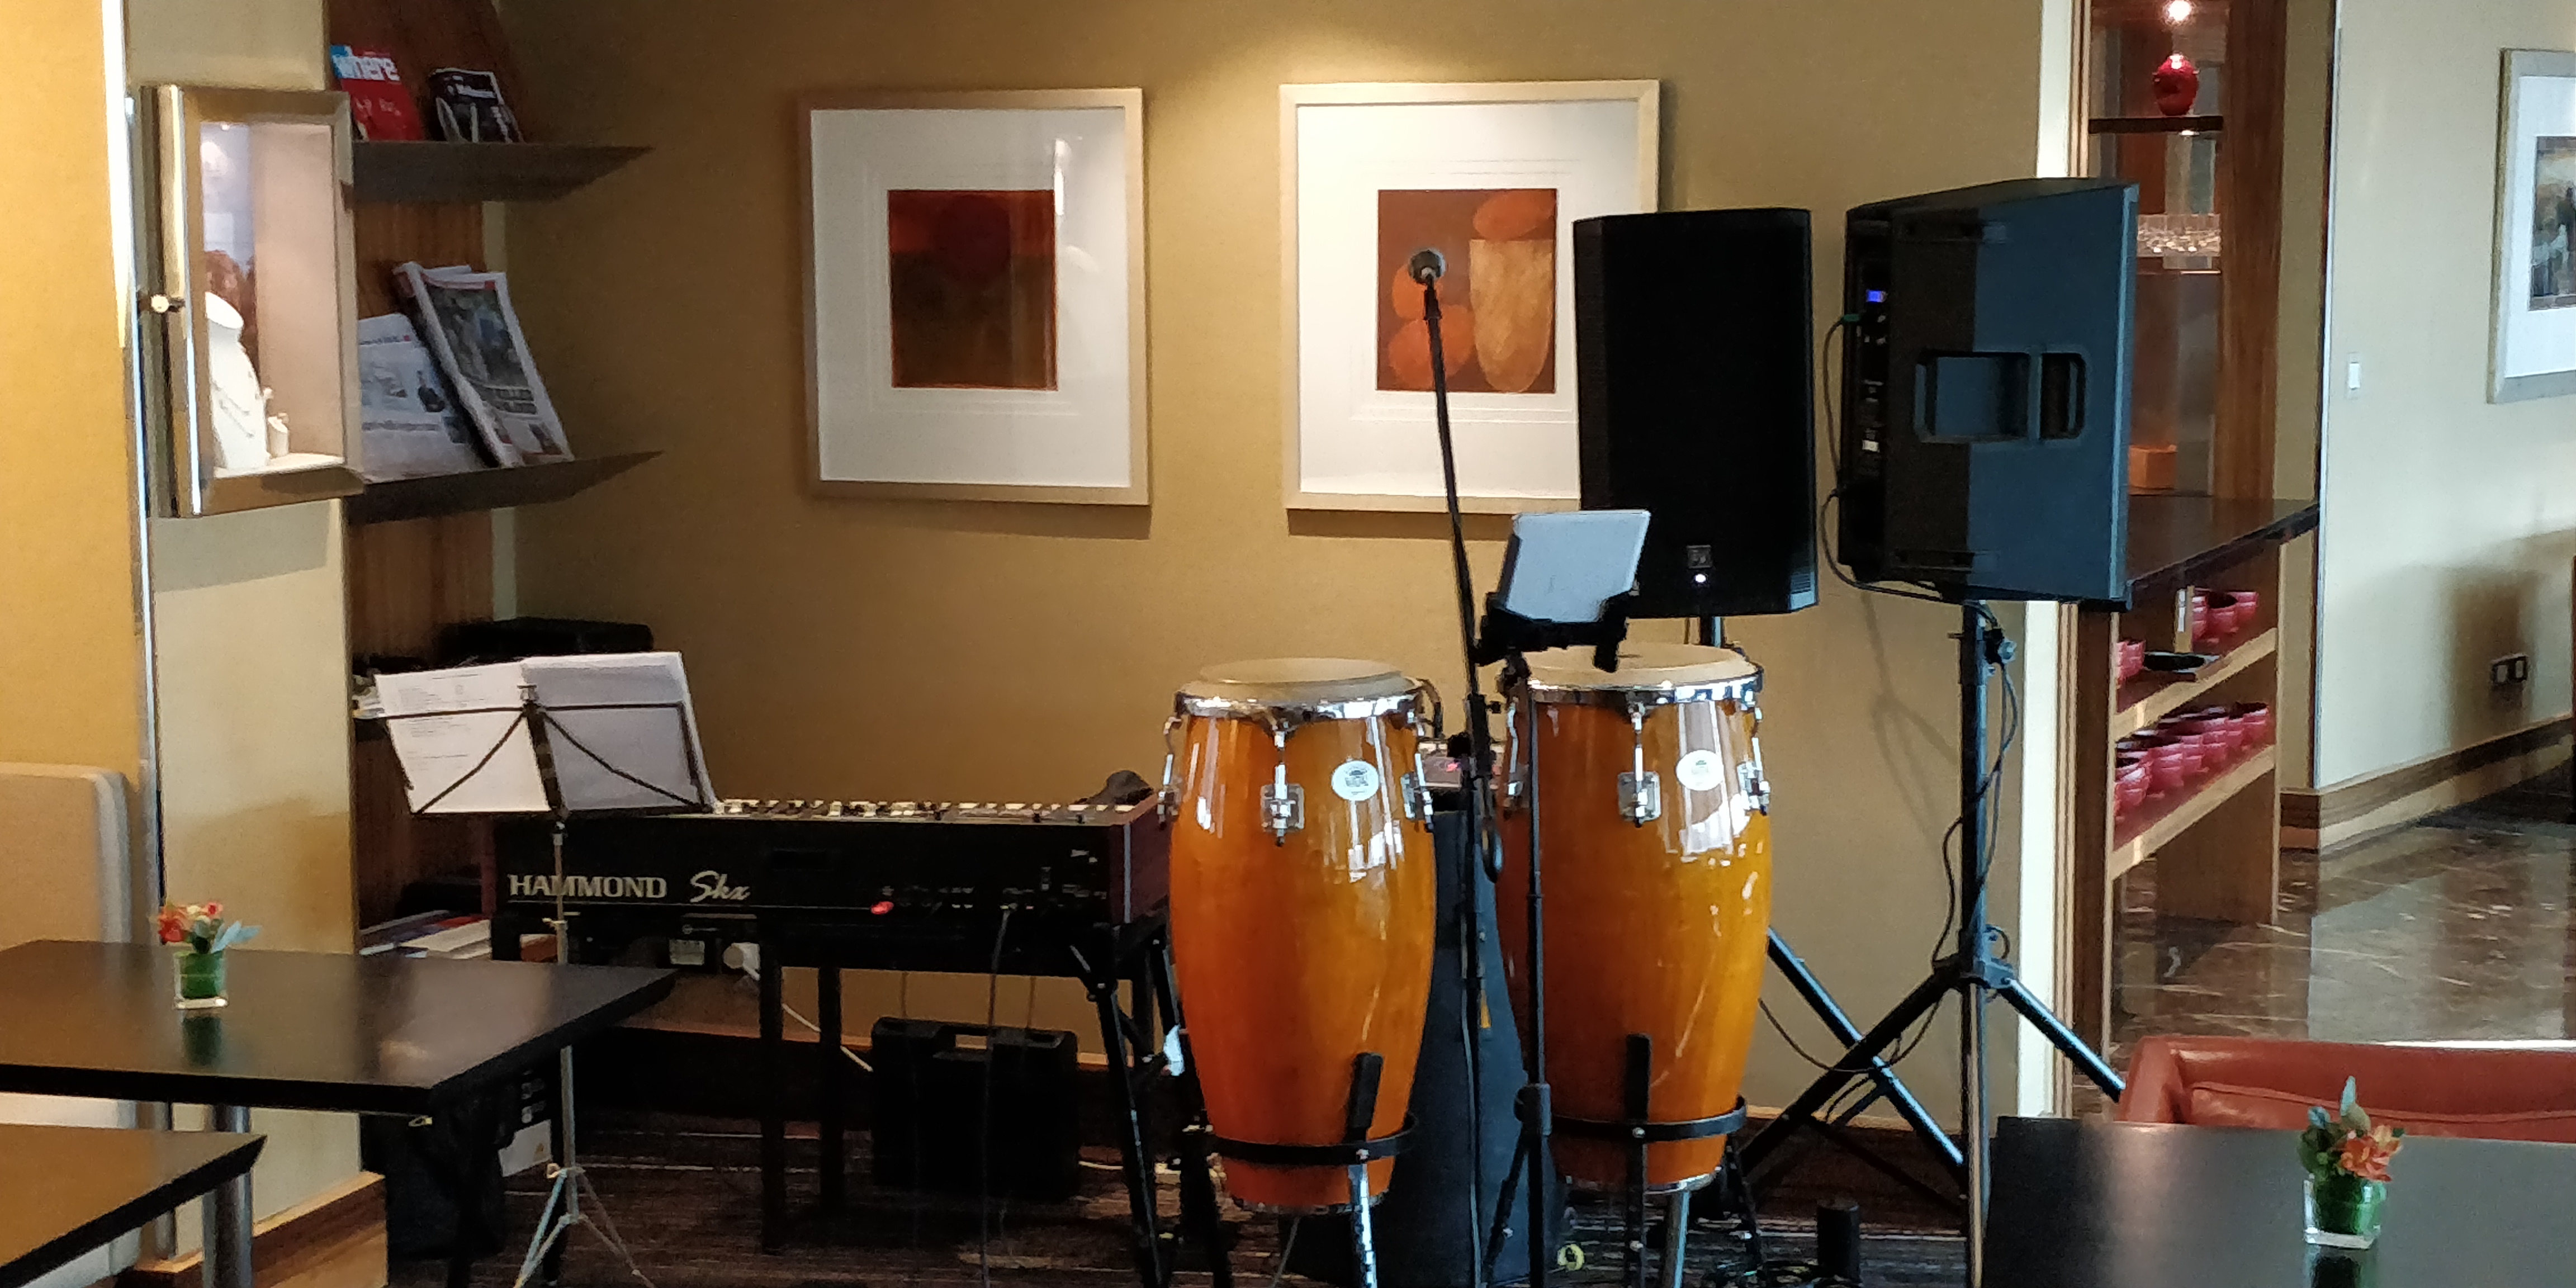 A PICTURE OF THE BAND'S CORNER IN THE GRAND LOUNGE